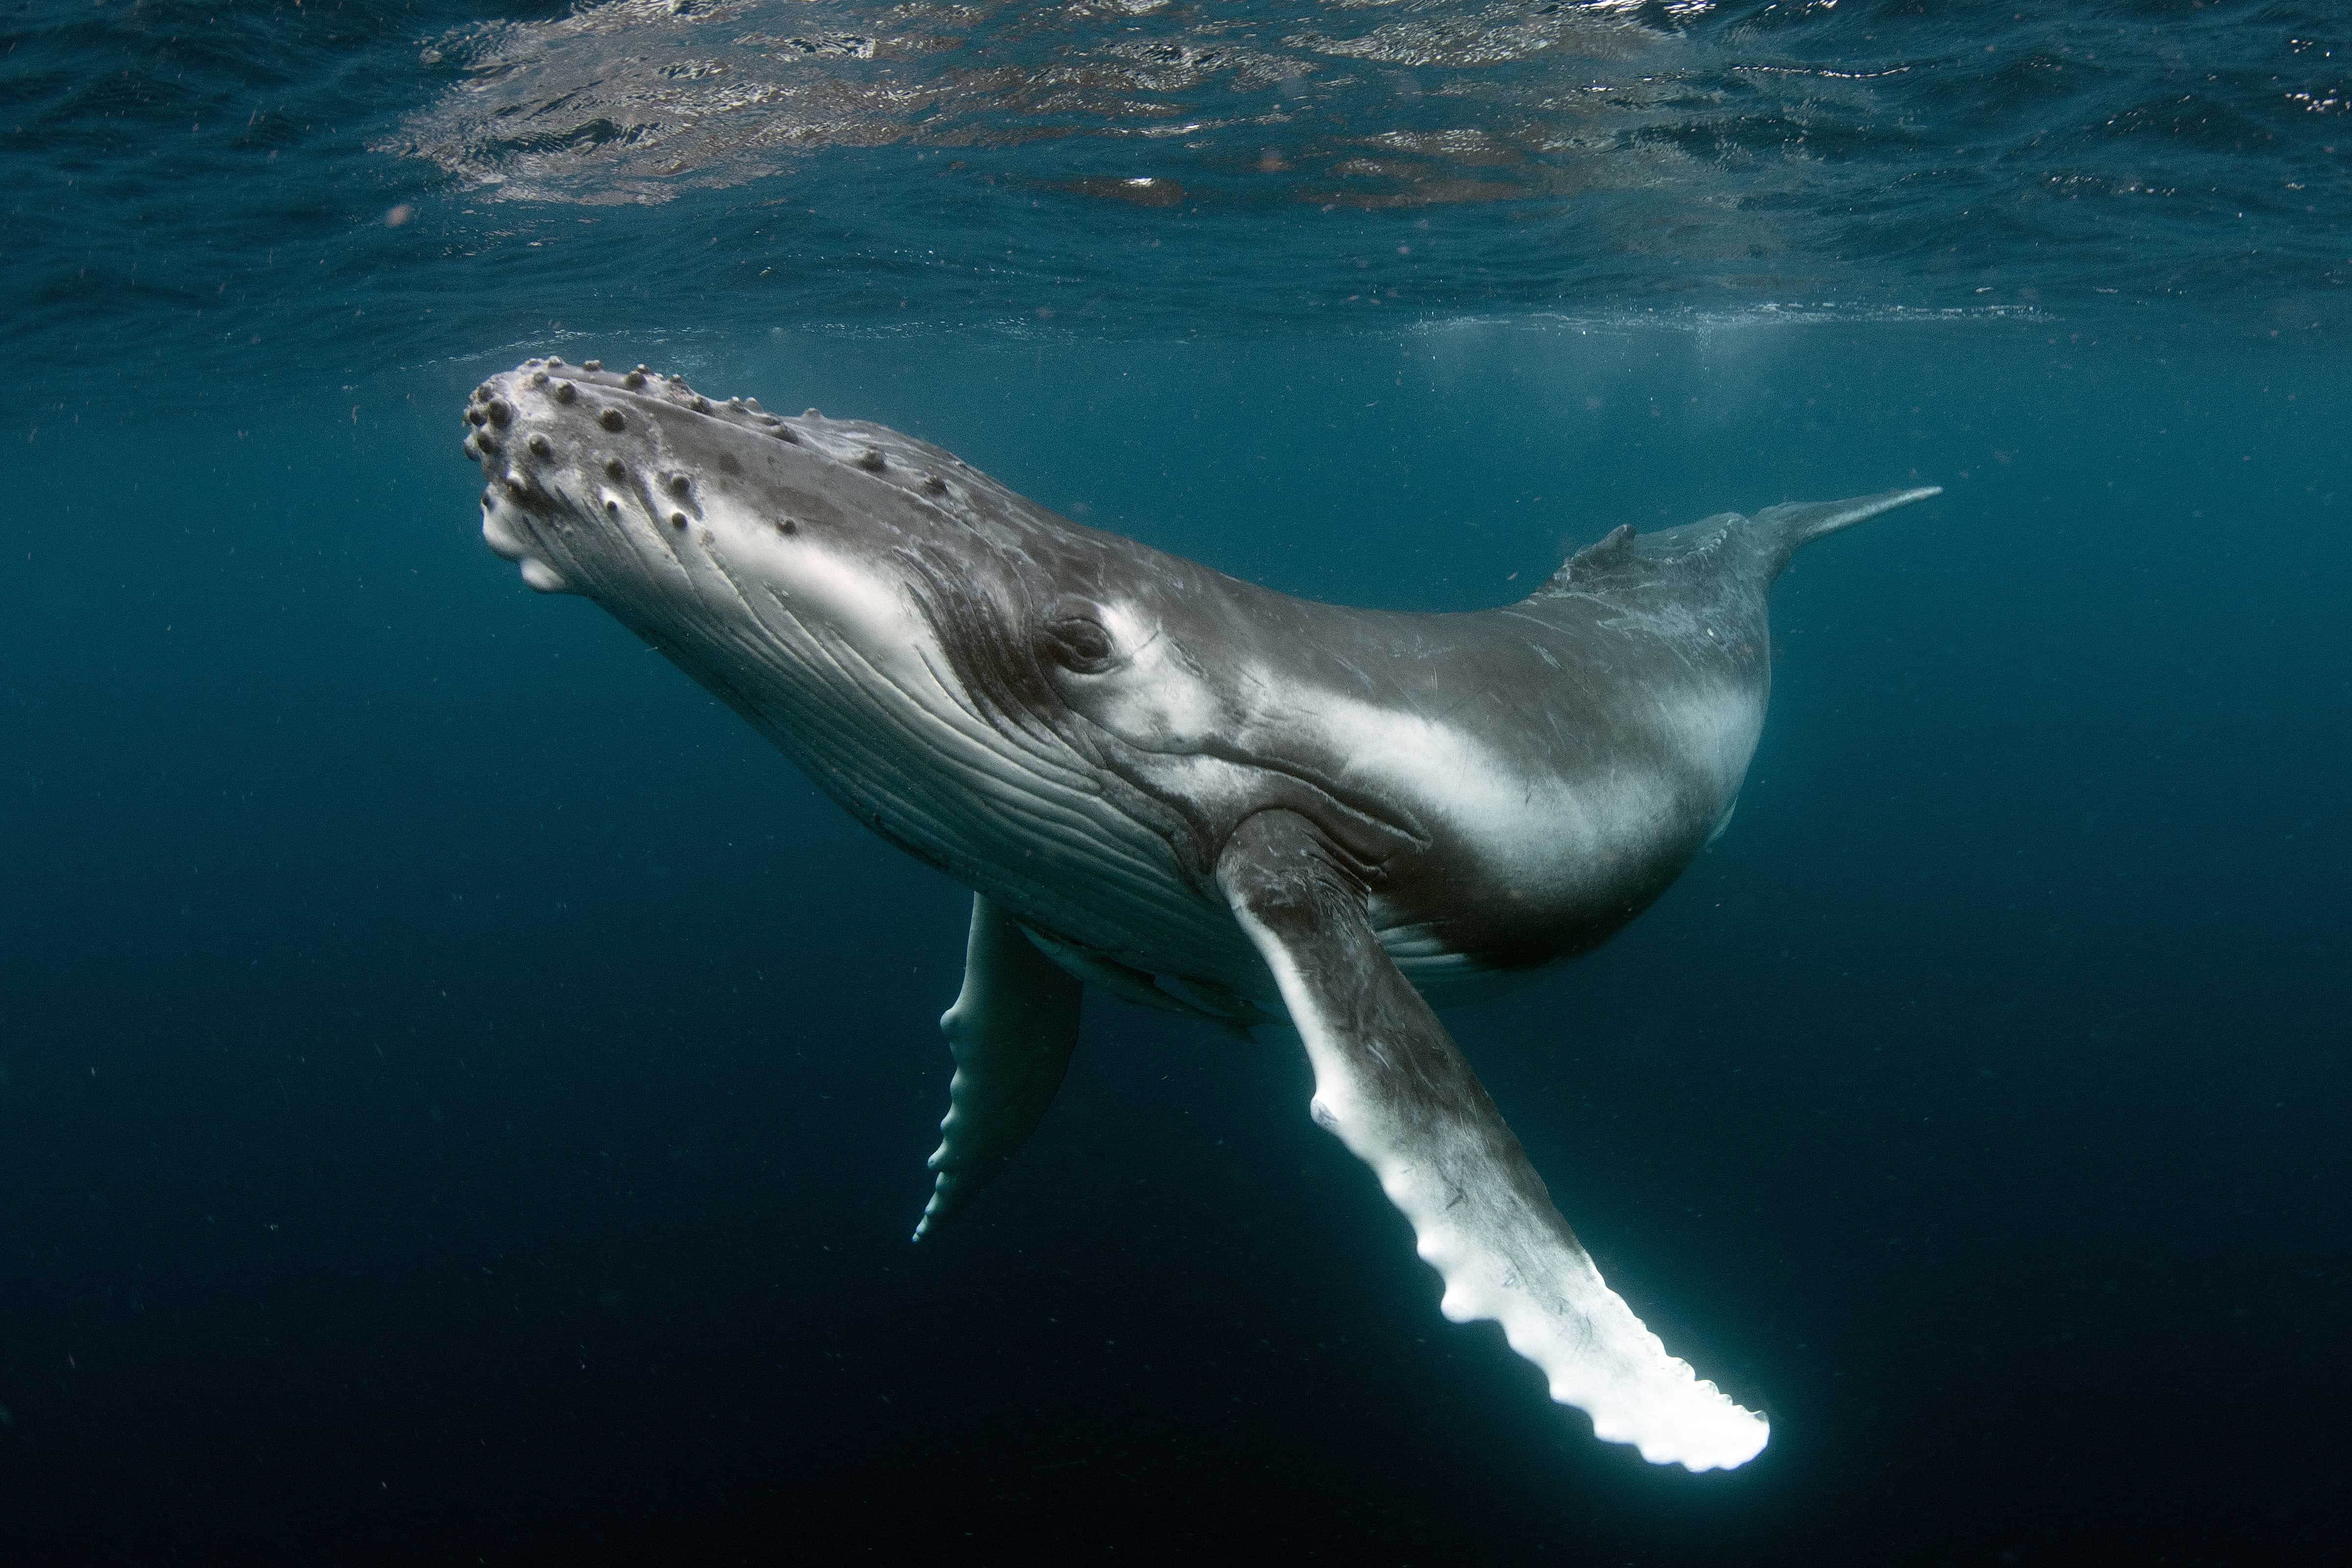 A humpback whale swimming underwater